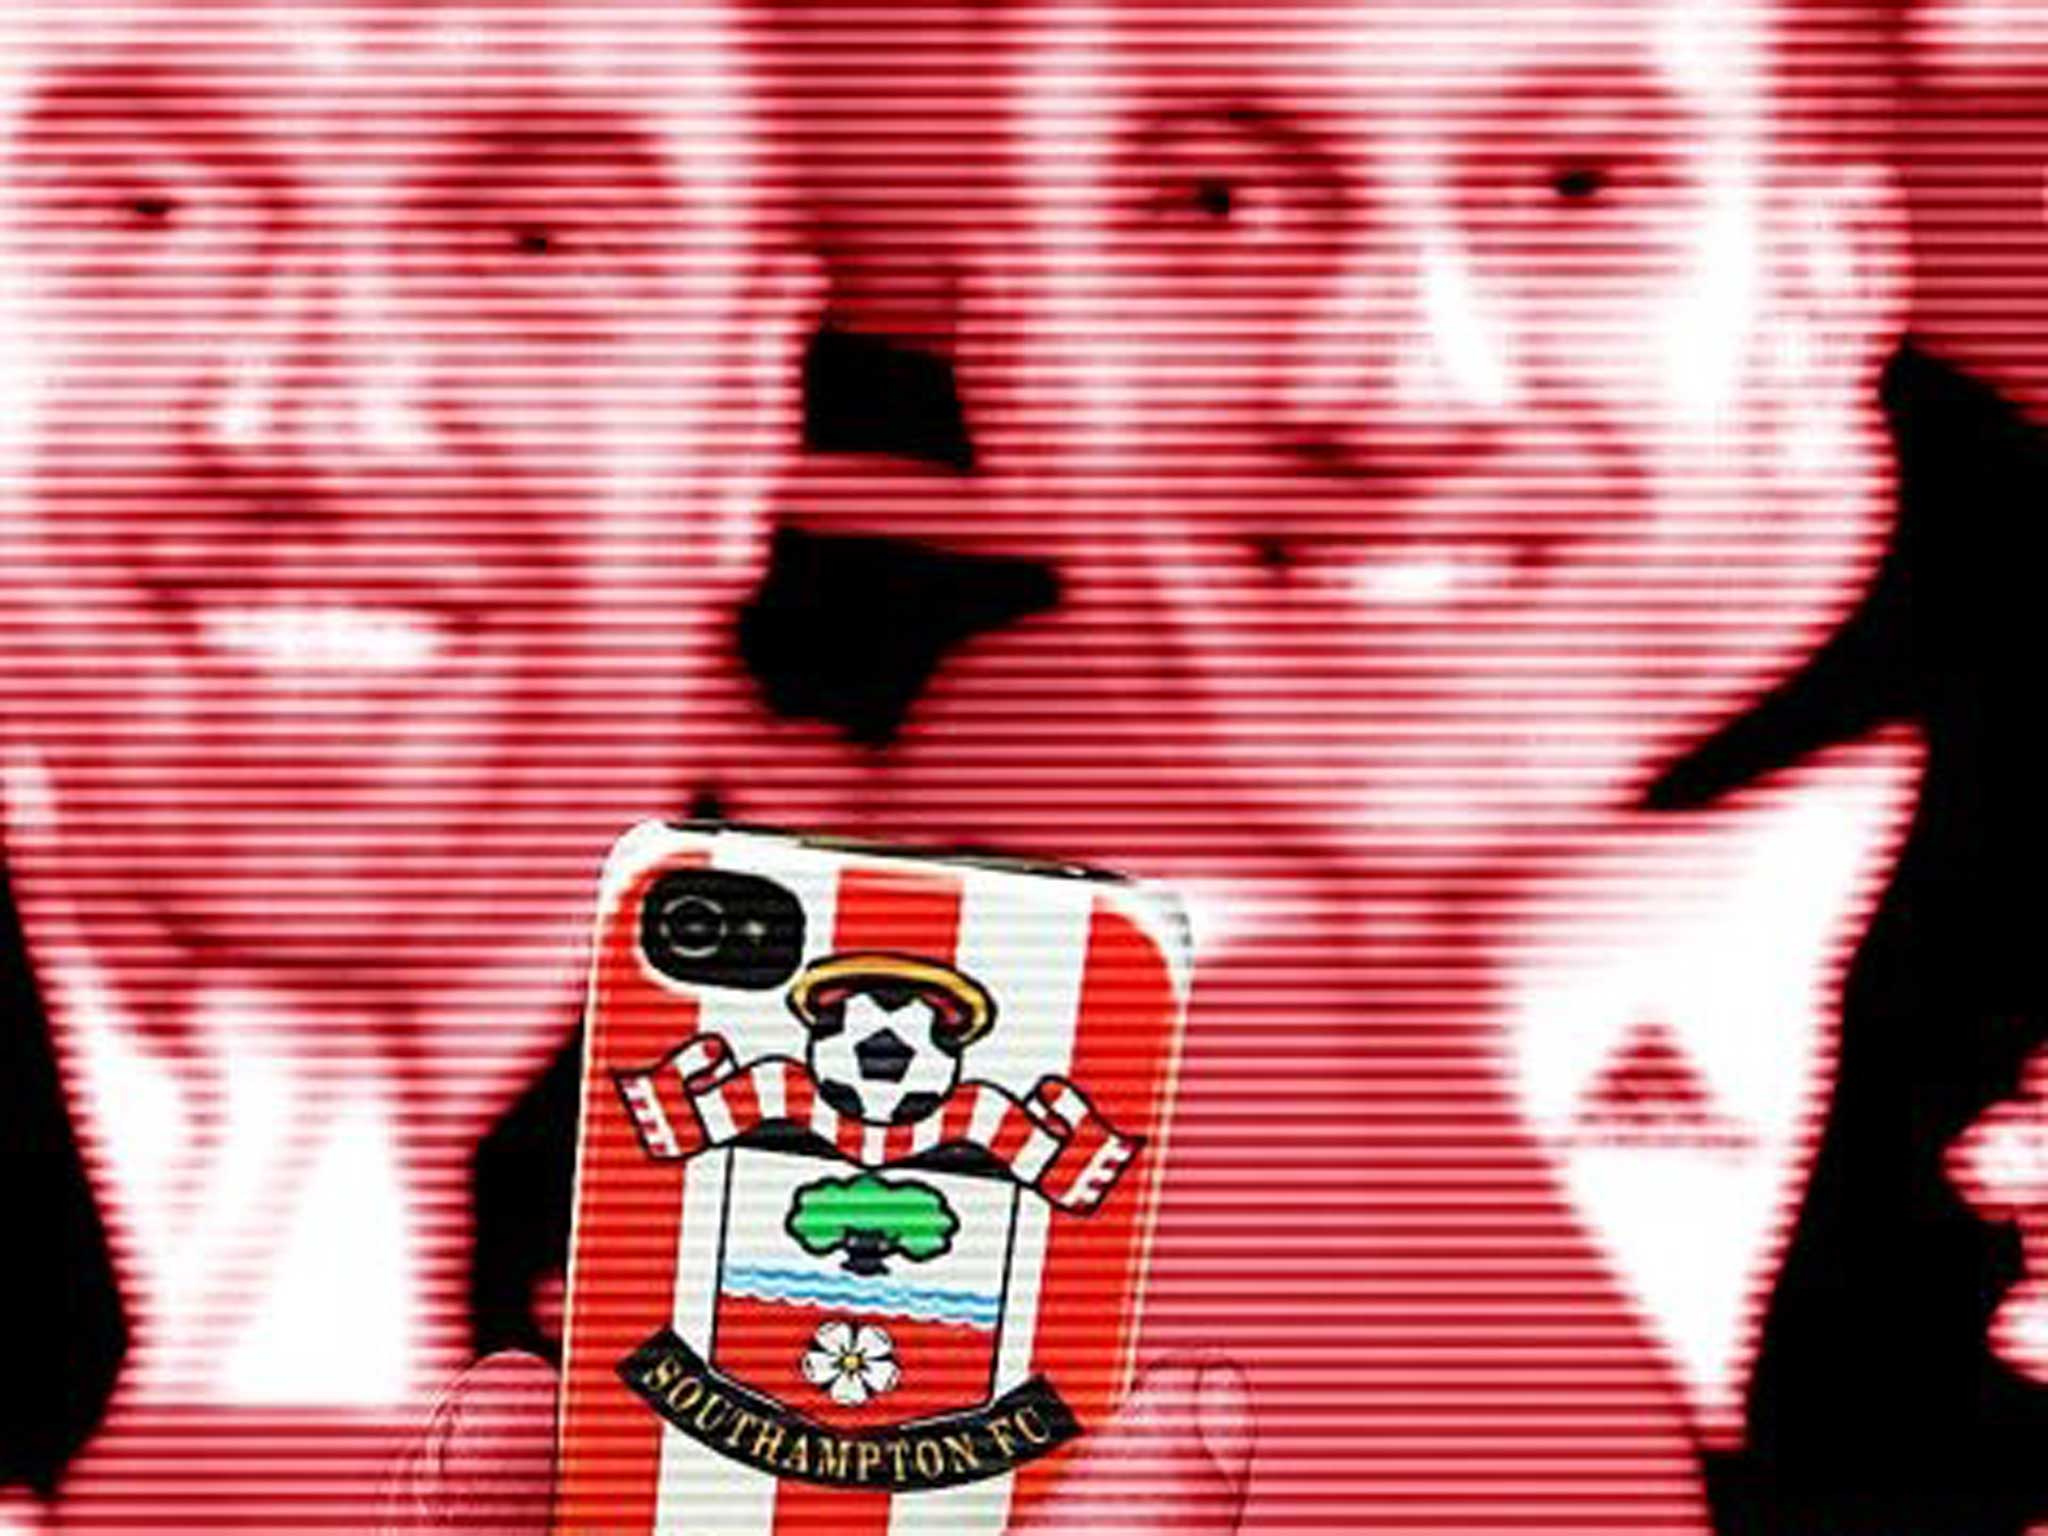 Seeing red: Southampton has already lost one of its best players to Liverpool